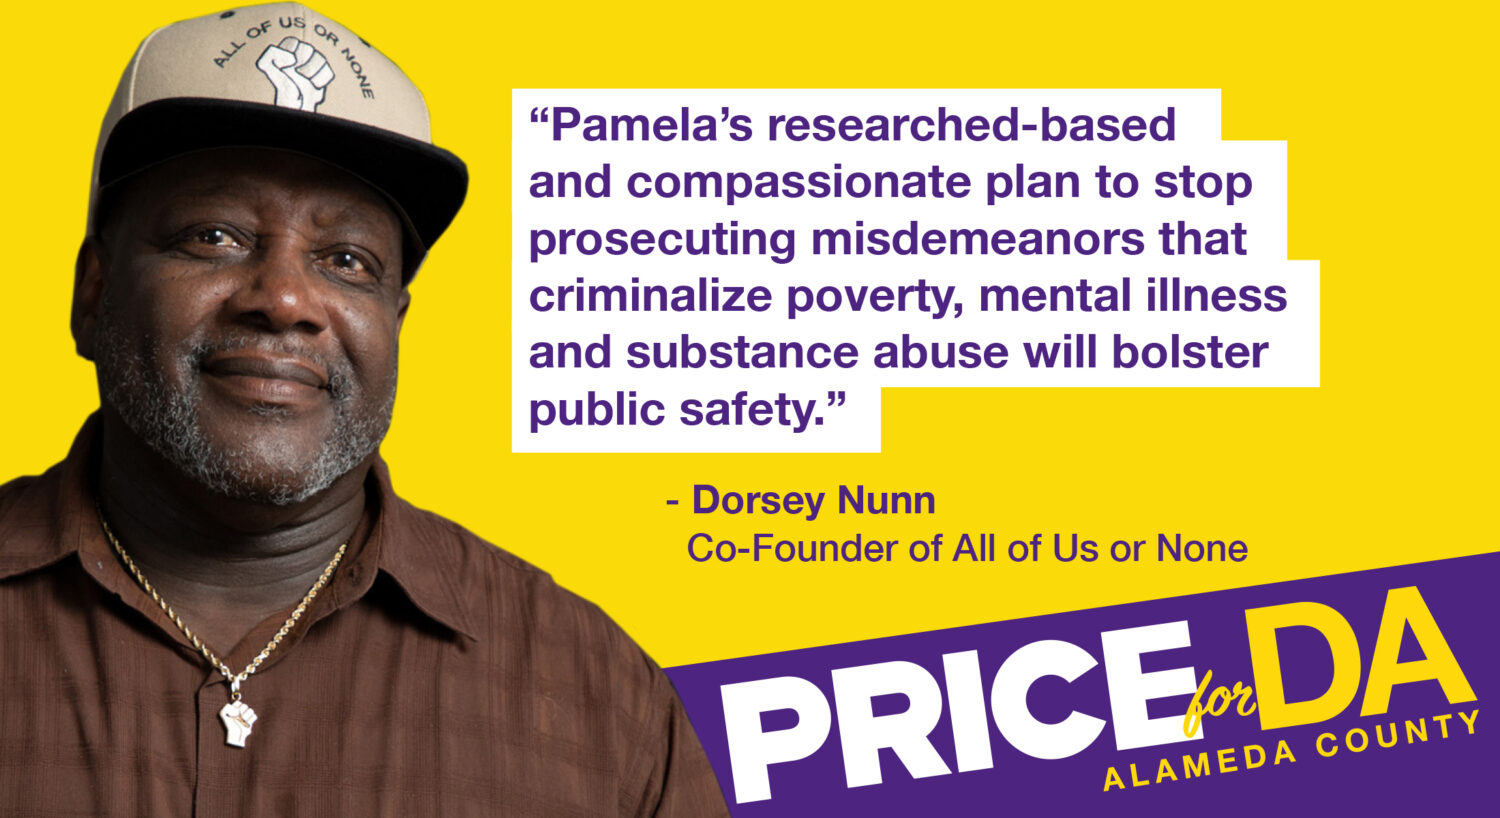 Dorsey Nunn, Co-Founder of All of Us or None, endorses Pamela Price for Alameda County District Attorney